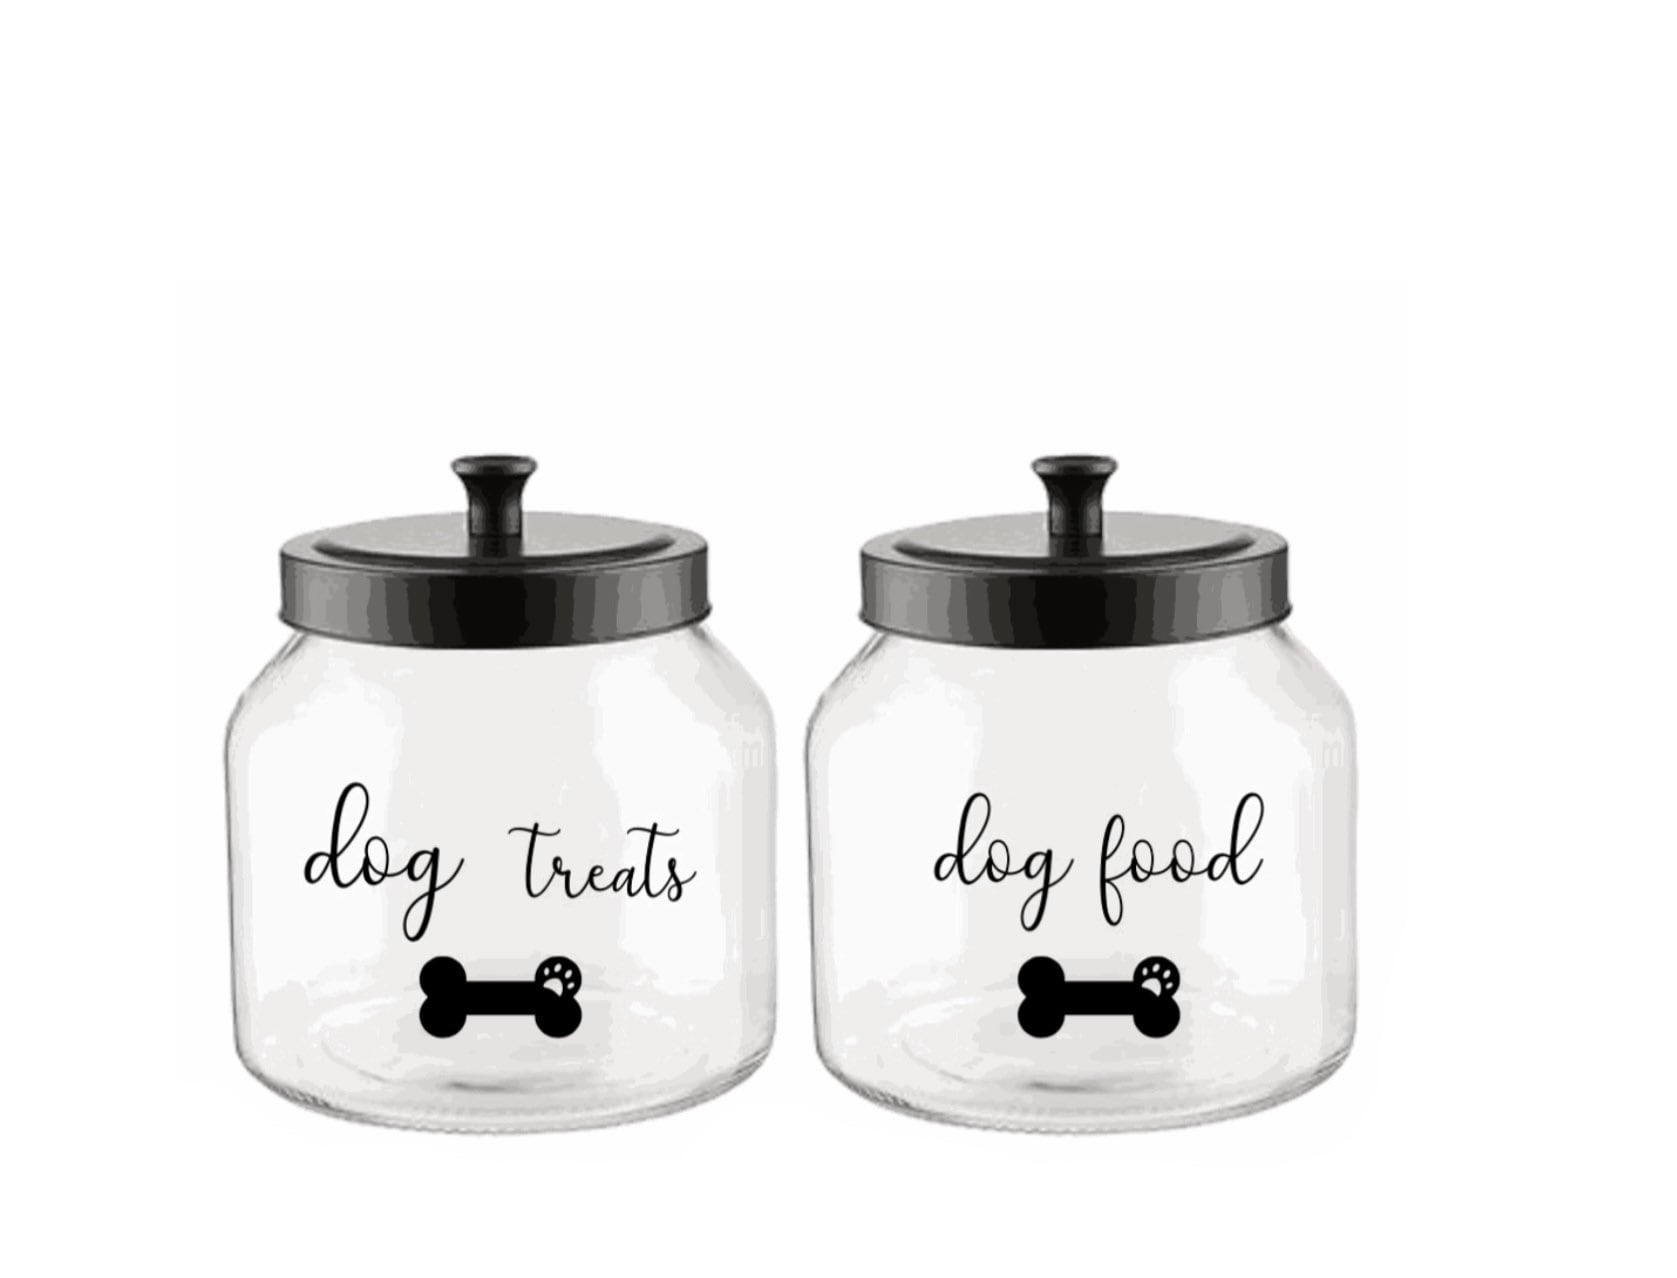 Vinyl Sticker Decal Labels for Jars pet food. Cat Food containers cellar